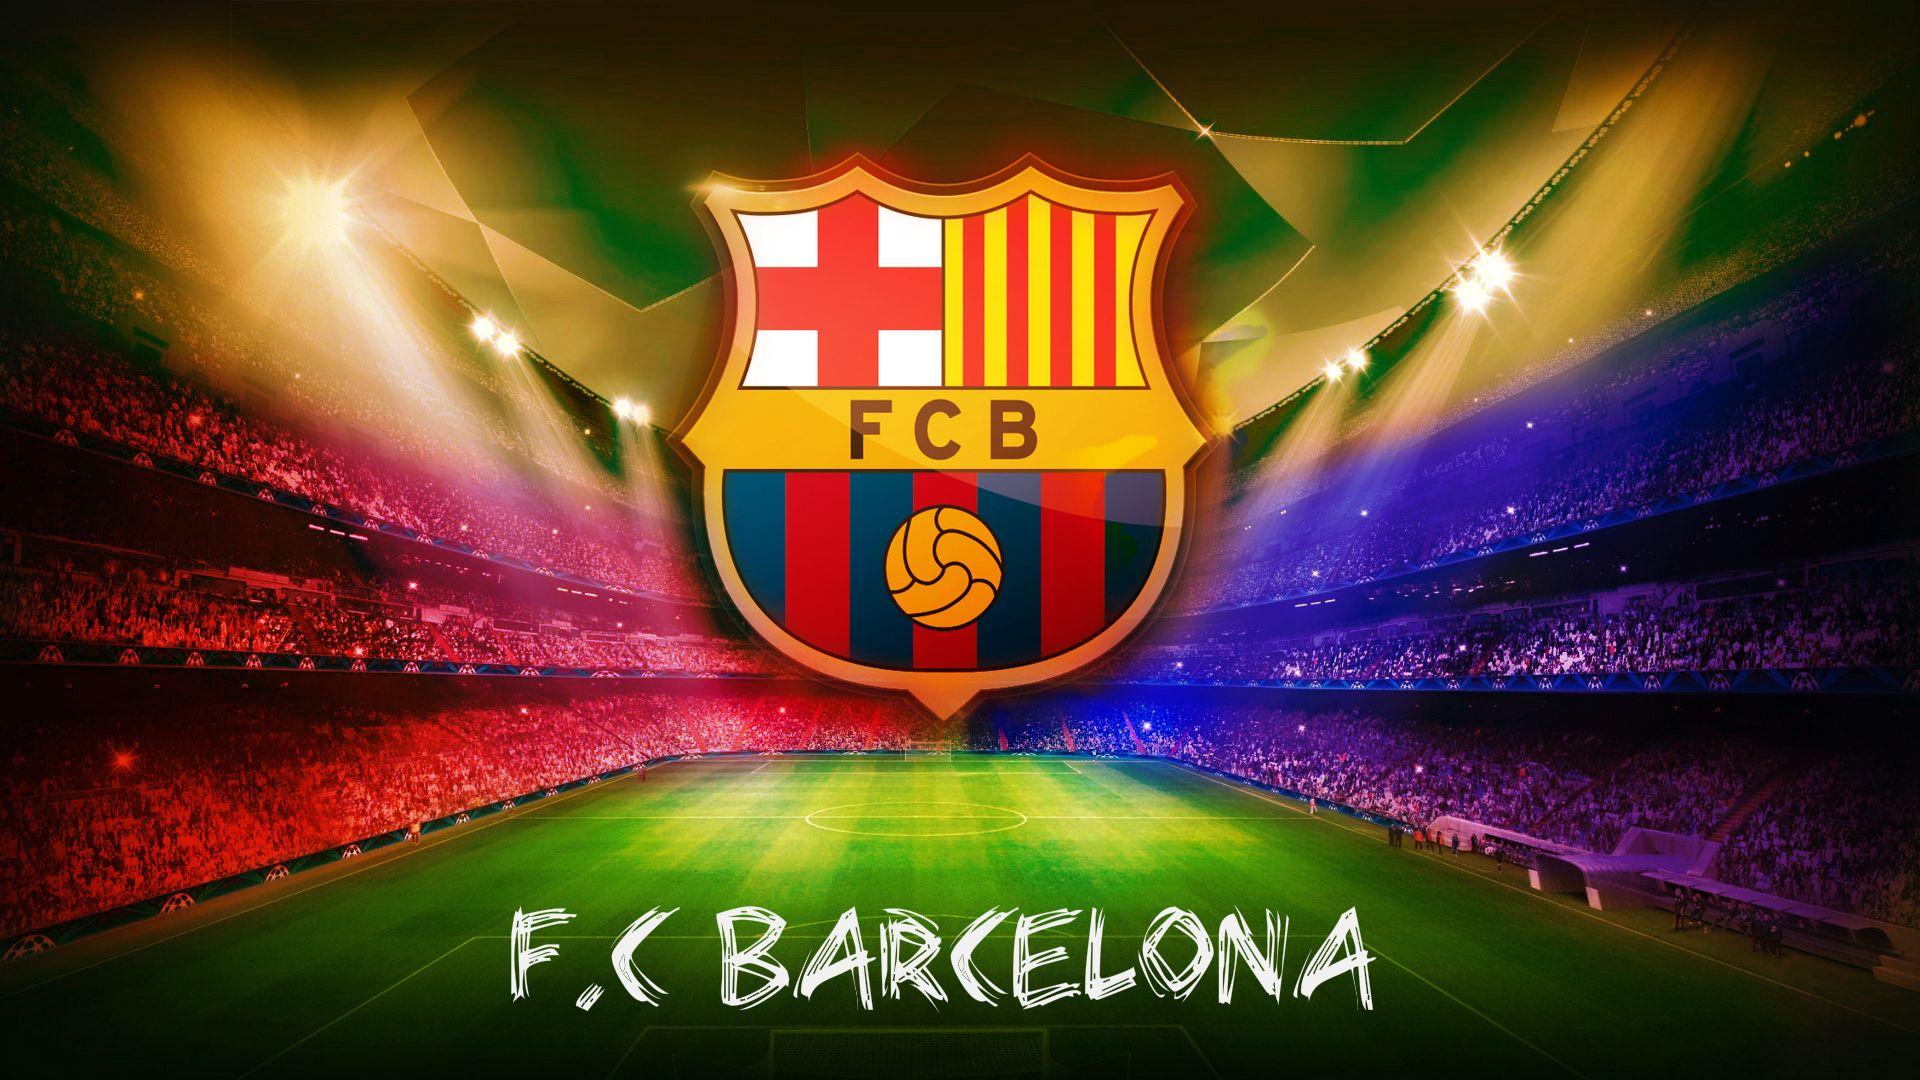 17 Fc Barcelona Wallpaper Hd Pictures Naoll Hd